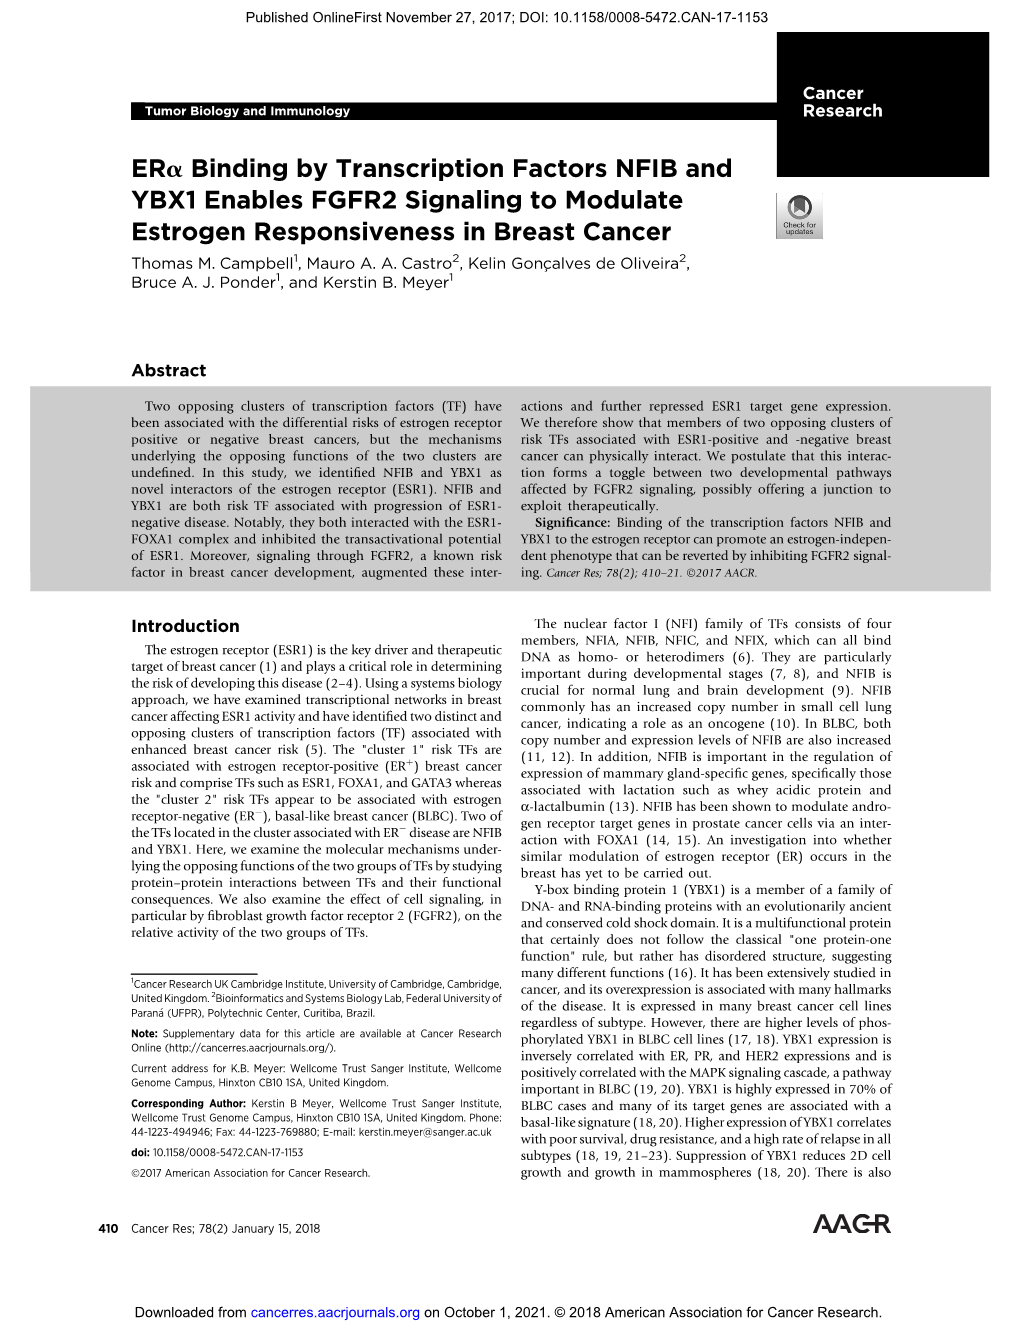 Era Binding by Transcription Factors NFIB and YBX1 Enables FGFR2 Signaling to Modulate Estrogen Responsiveness in Breast Cancer Thomas M